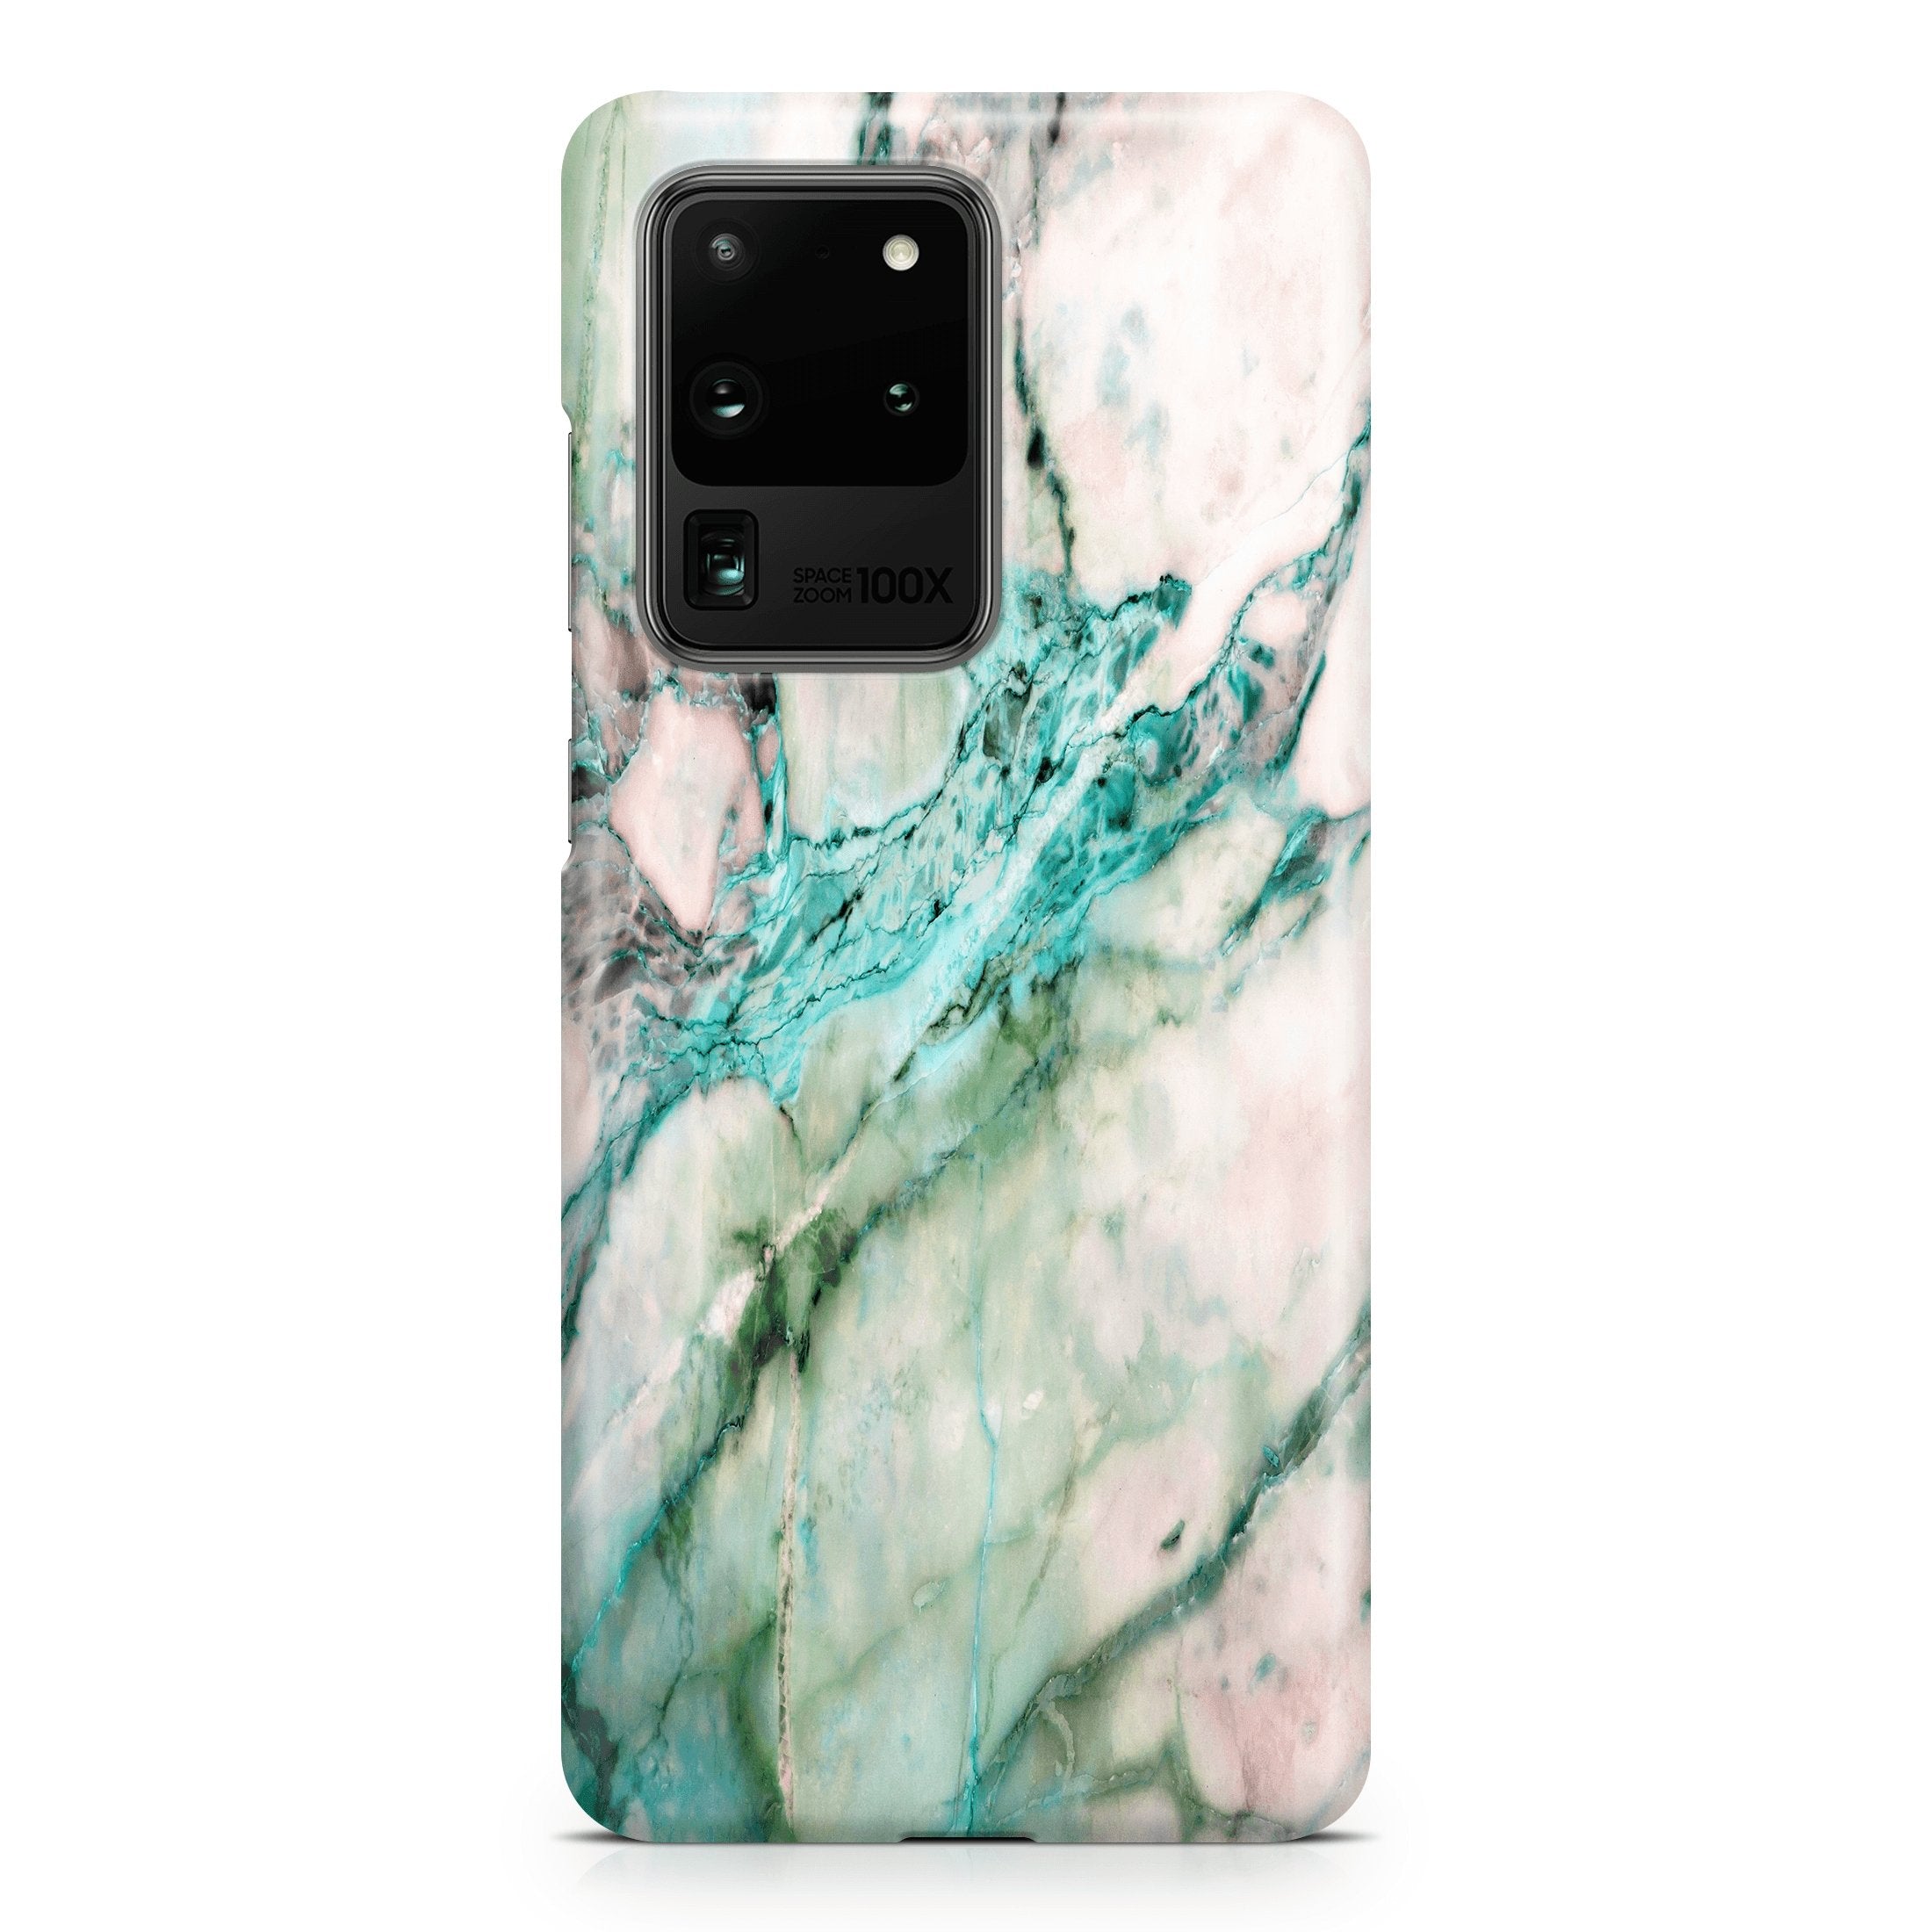 Turquoise Marble - Samsung